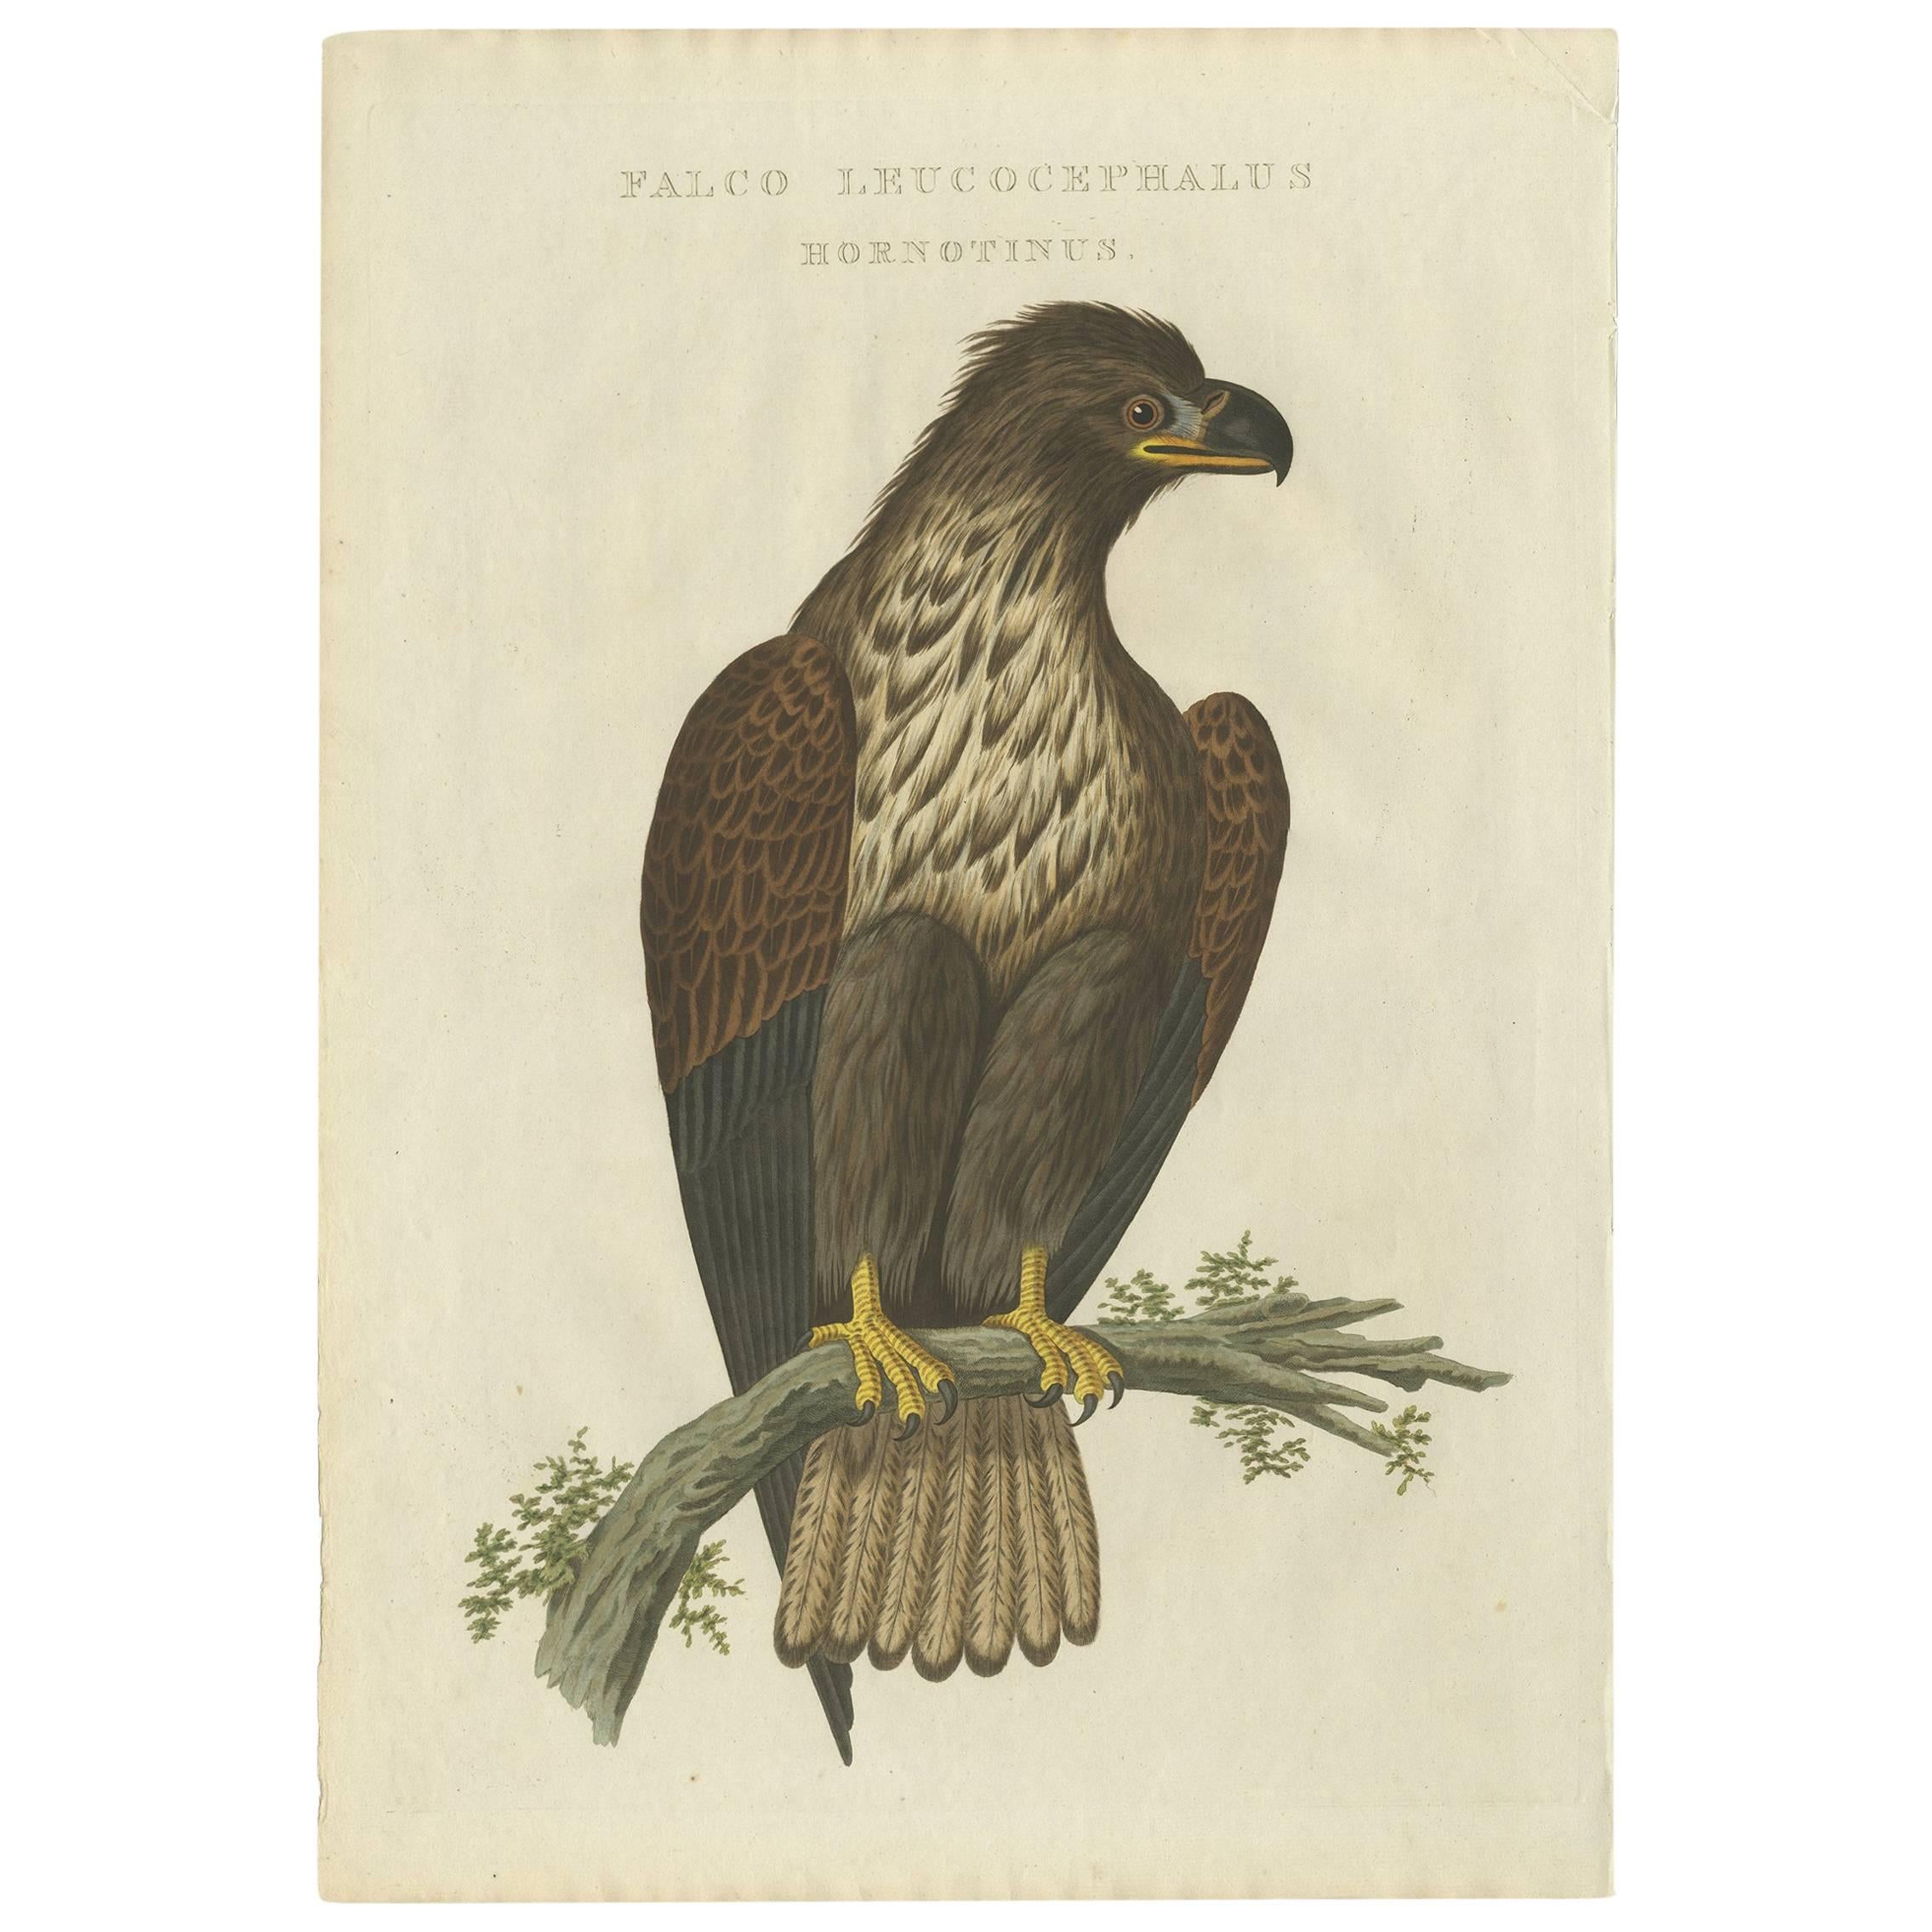 Antique Bird Print of the White-Tailed Eagle by Sepp & Nozeman, 1829